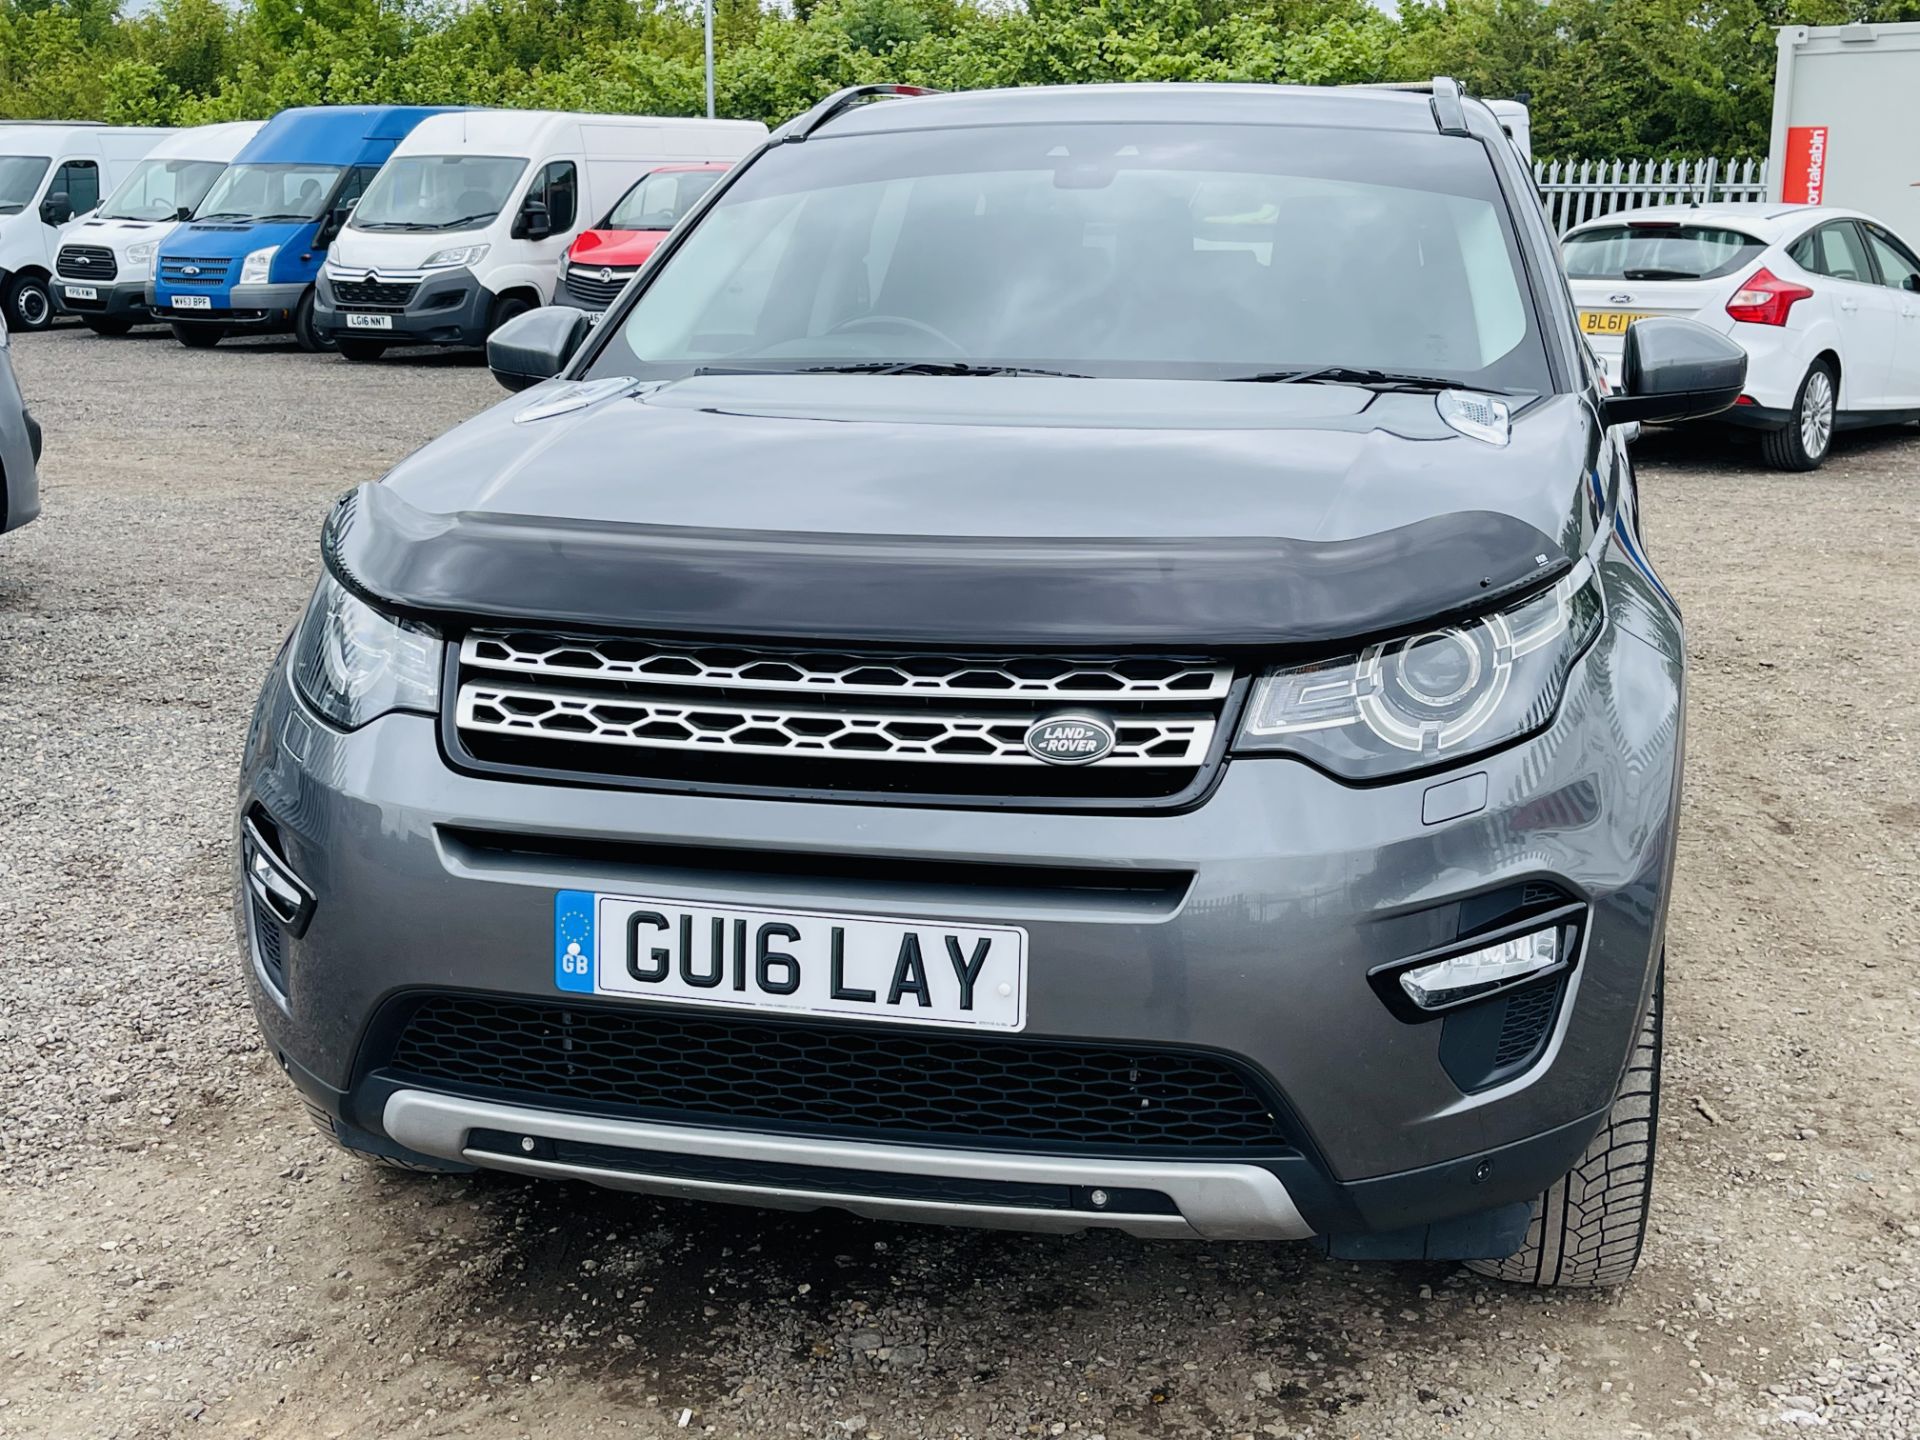 ** ON SALE **Land Rover Discovery sport 2.0 TD4 HSE 2016 '16 Reg' 7 seats - Sat Nav - Euro 6 - - Image 3 of 35